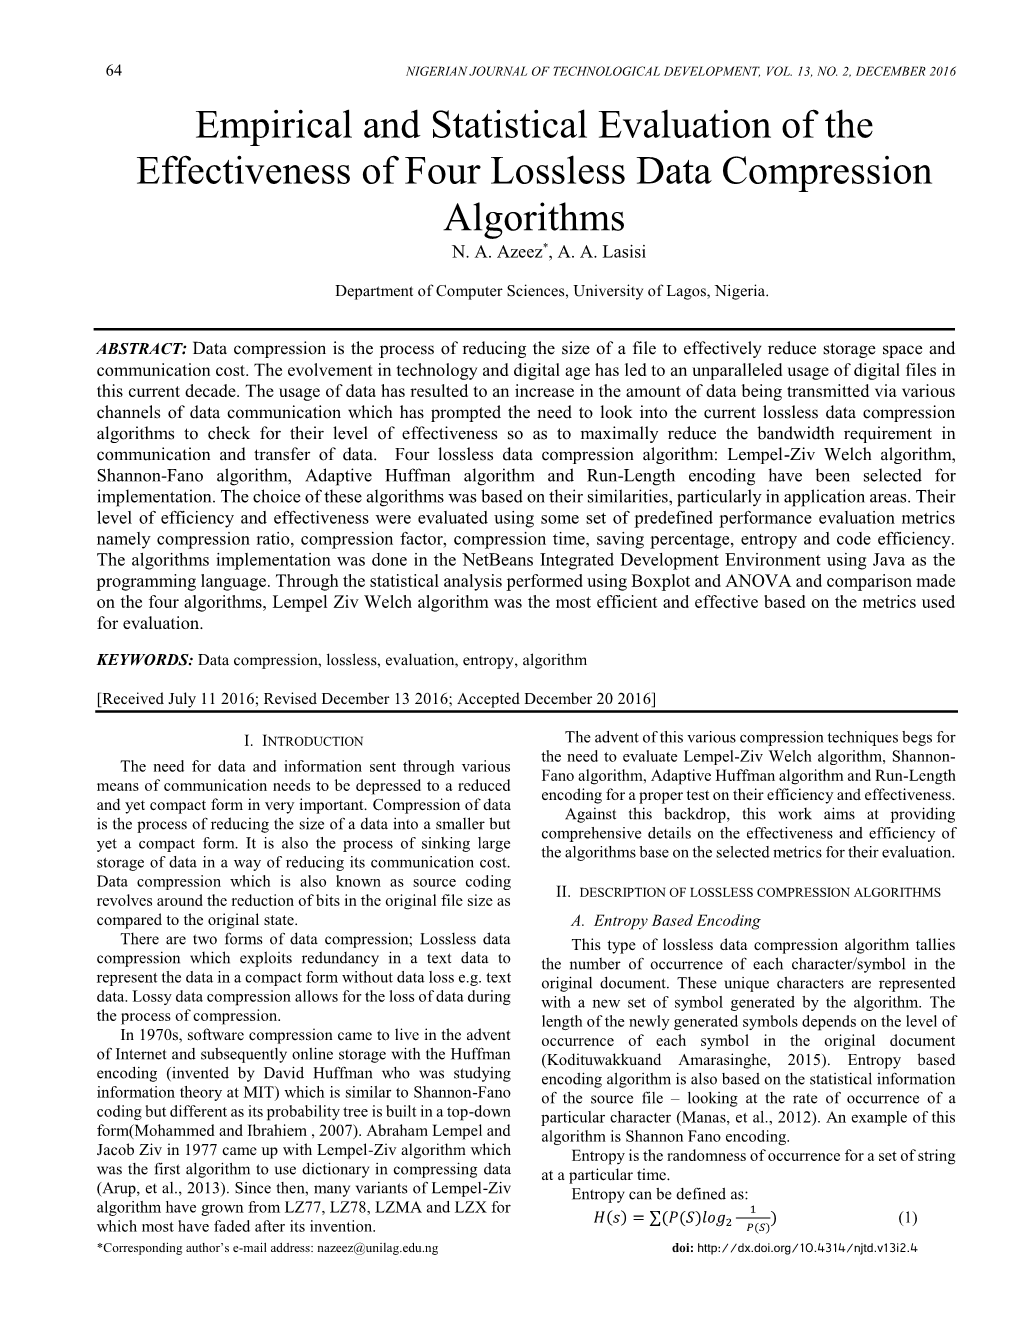 Empirical and Statistical Evaluation of the Effectiveness of Four Lossless Data Compression Algorithms N